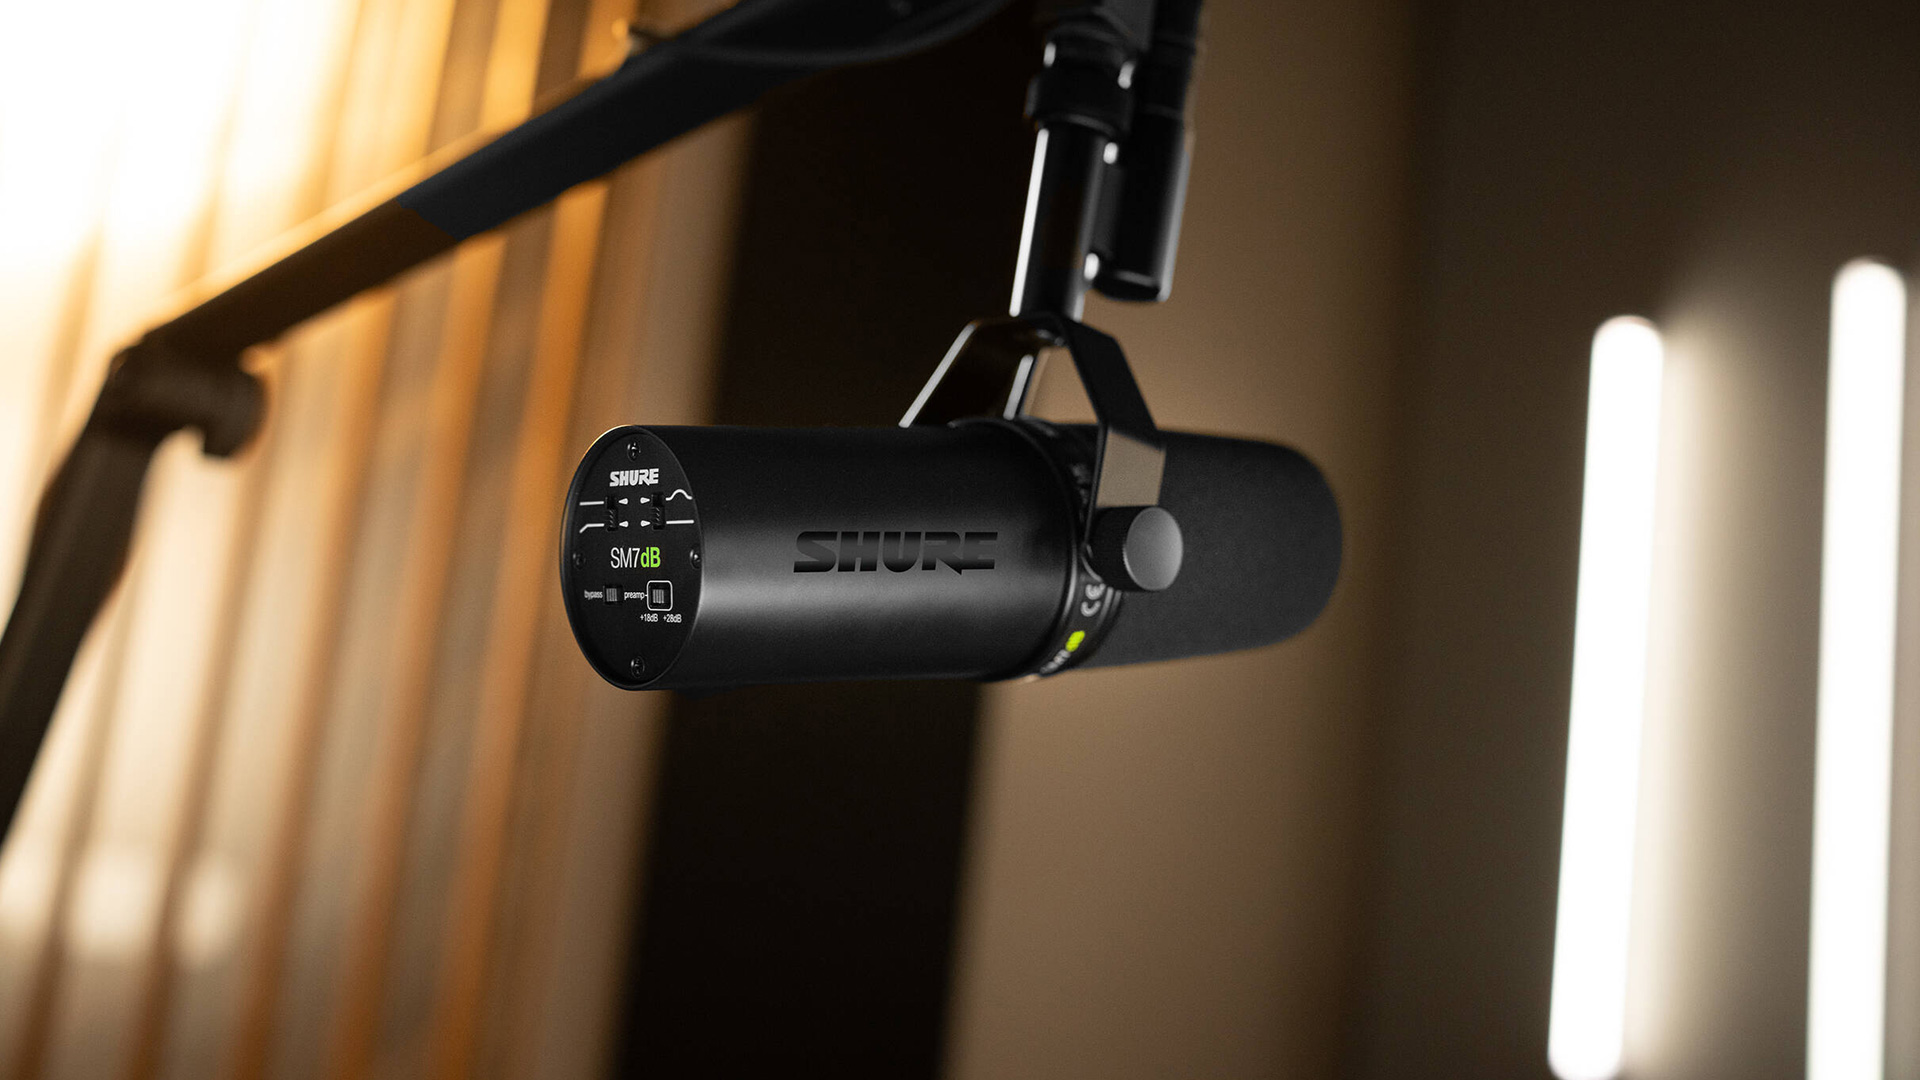 Shure SM7Db vocal microphone has a built-in preamp